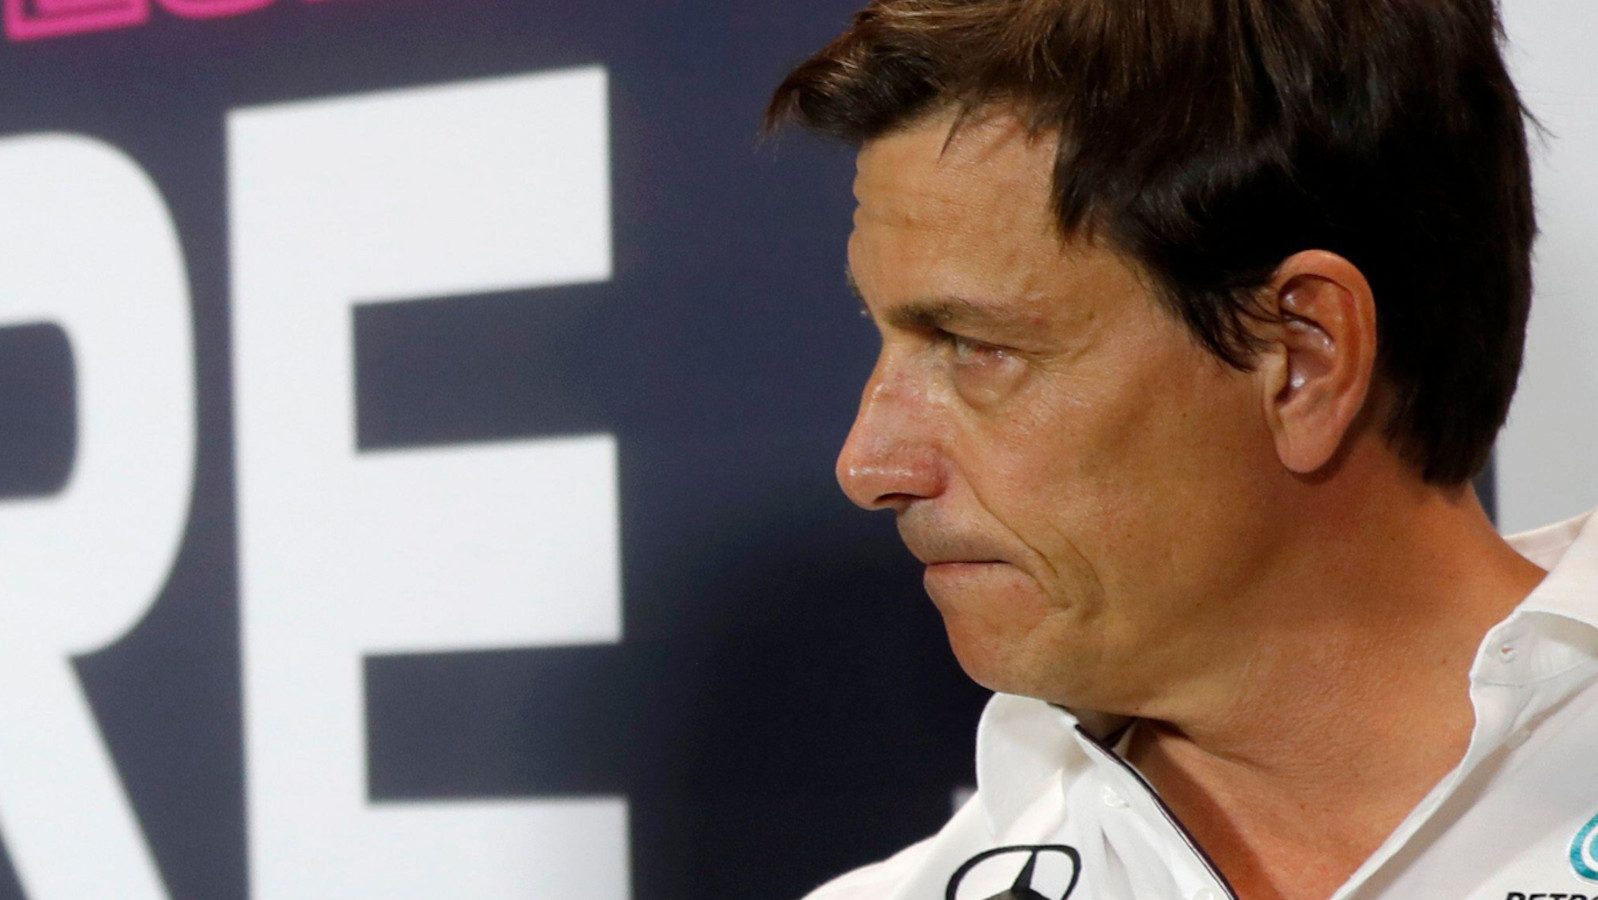 Mercedes motorsport boss Toto Wolff with his lips pursed looking stern.